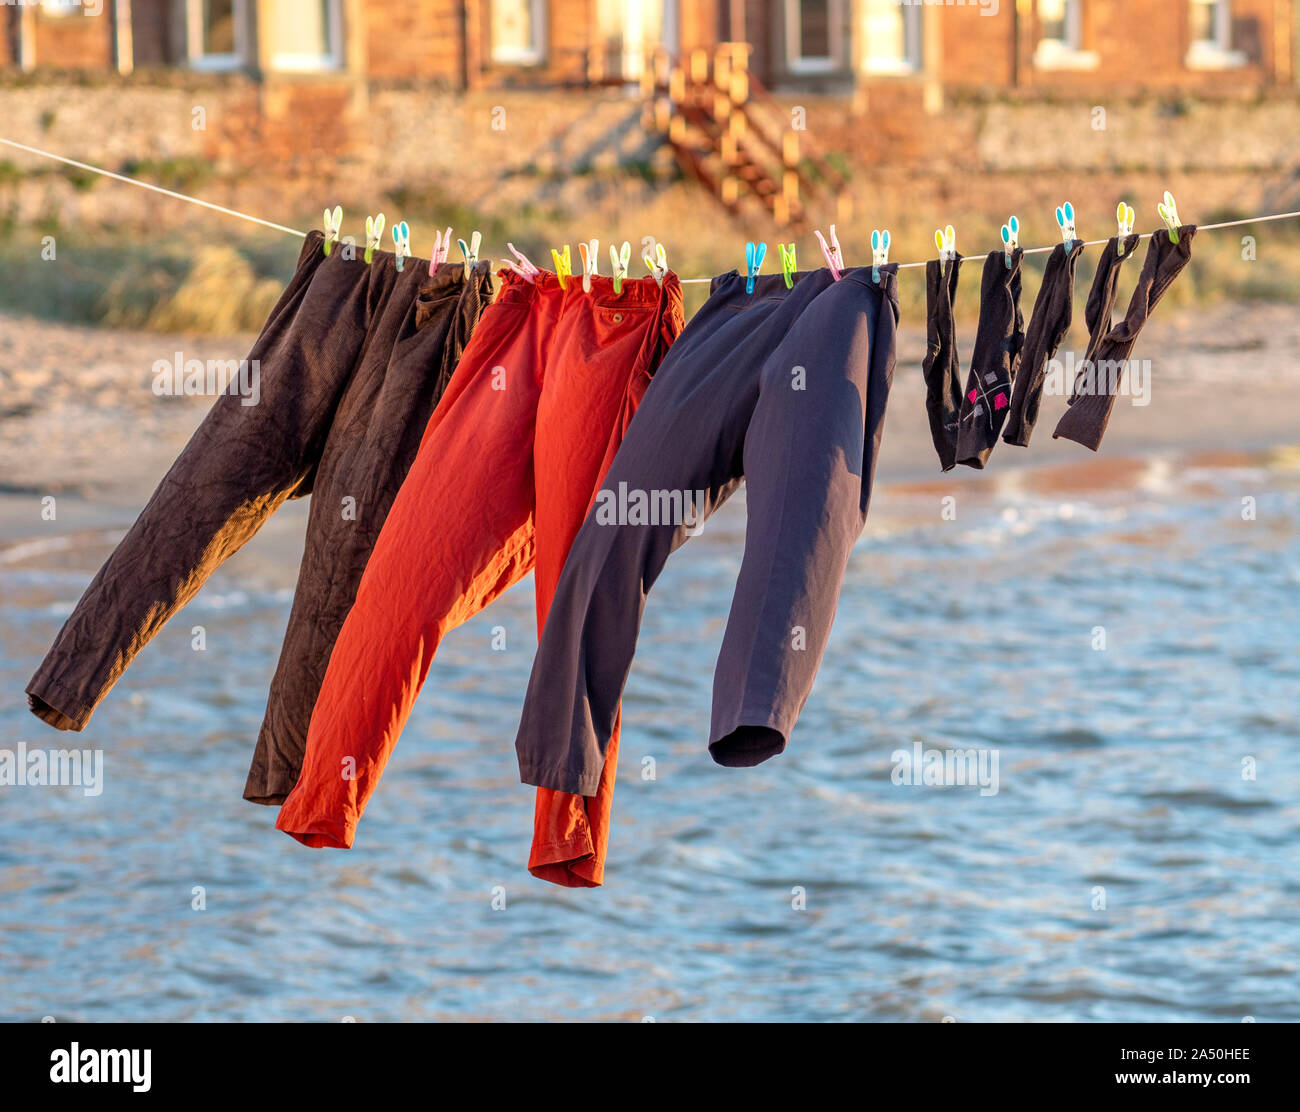 Washing drying on a clothes line Stock Photo